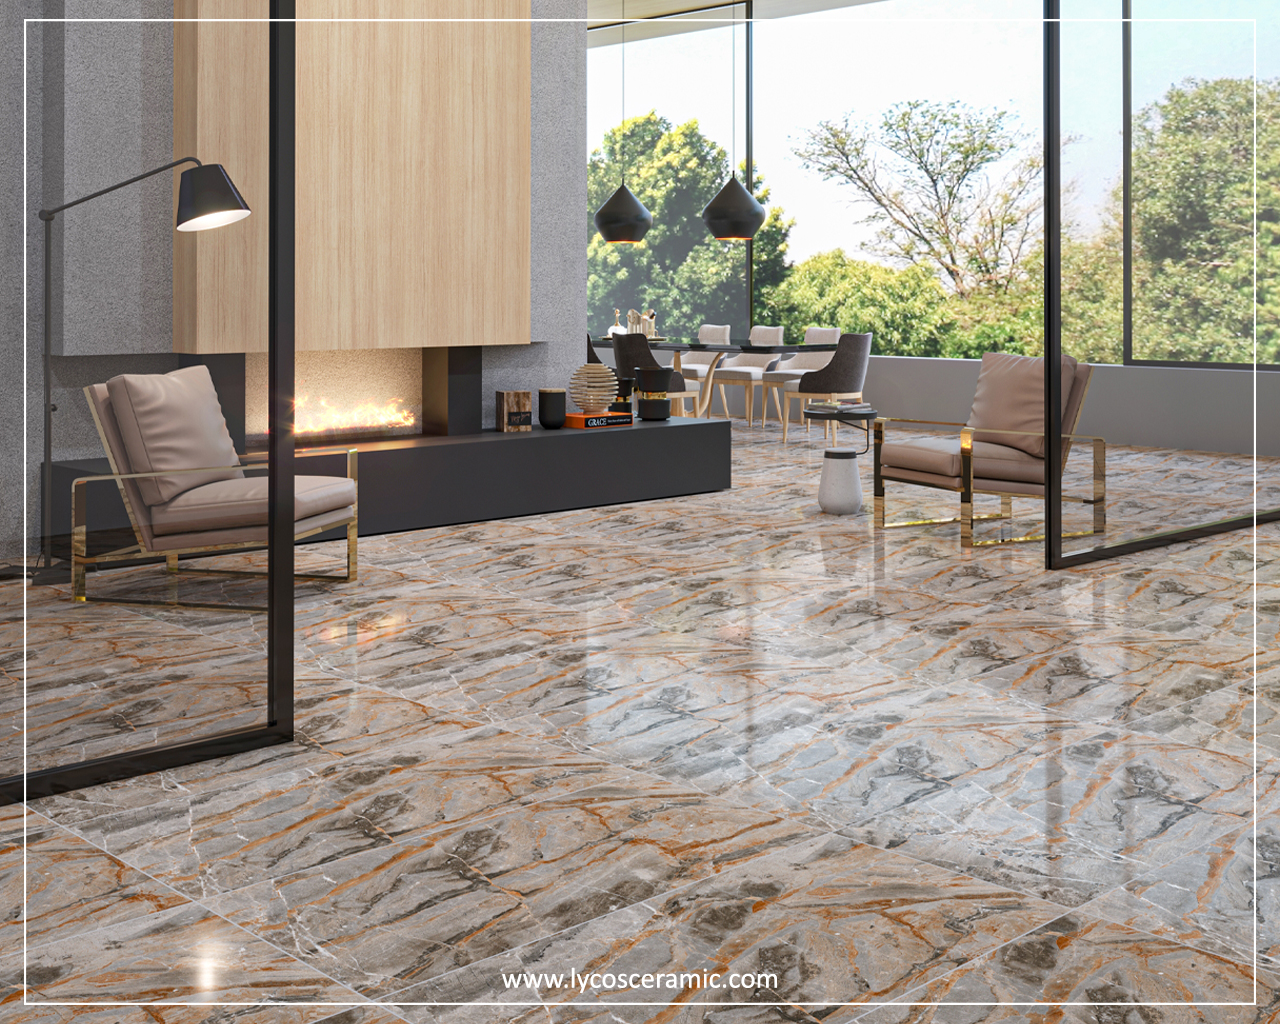 Why Glazed Vitrified Tiles are so famous in the Market?